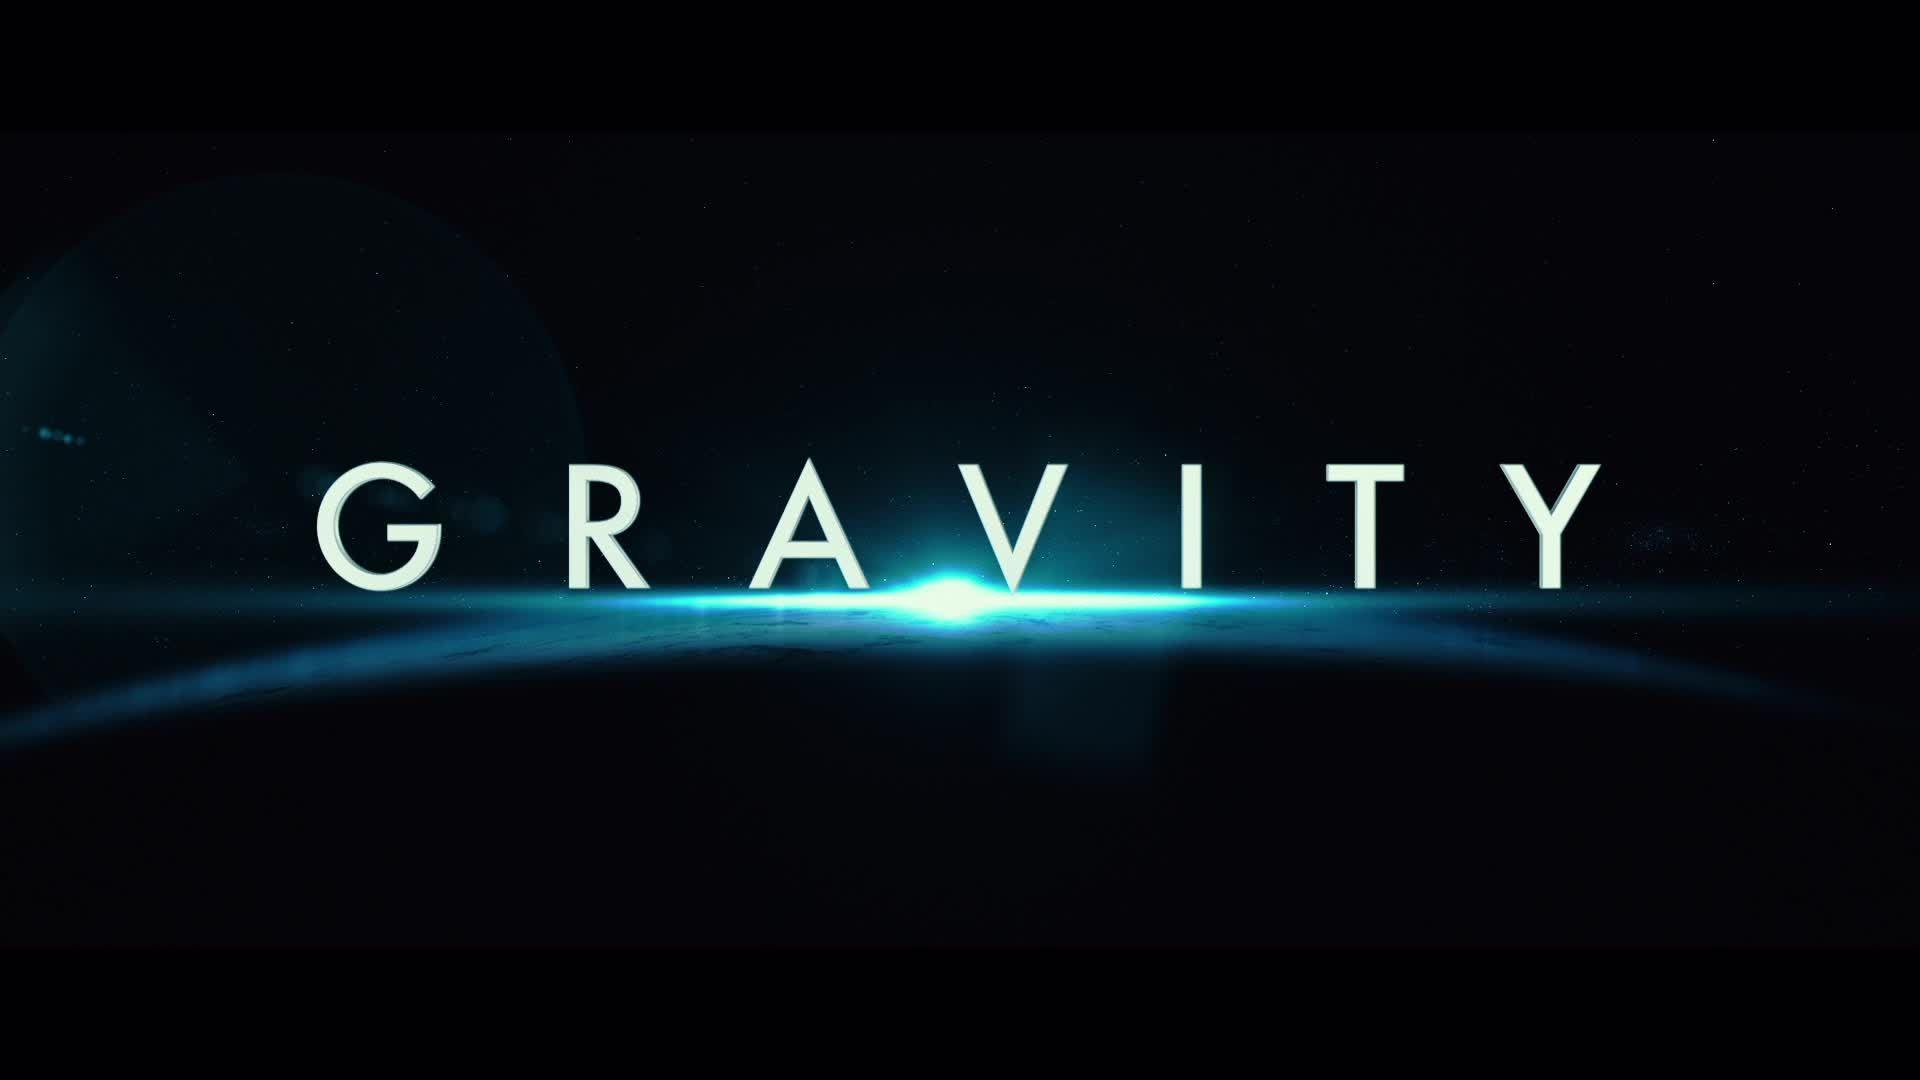 Cool Gravity Wallpapers HD - Wallpaper Cave